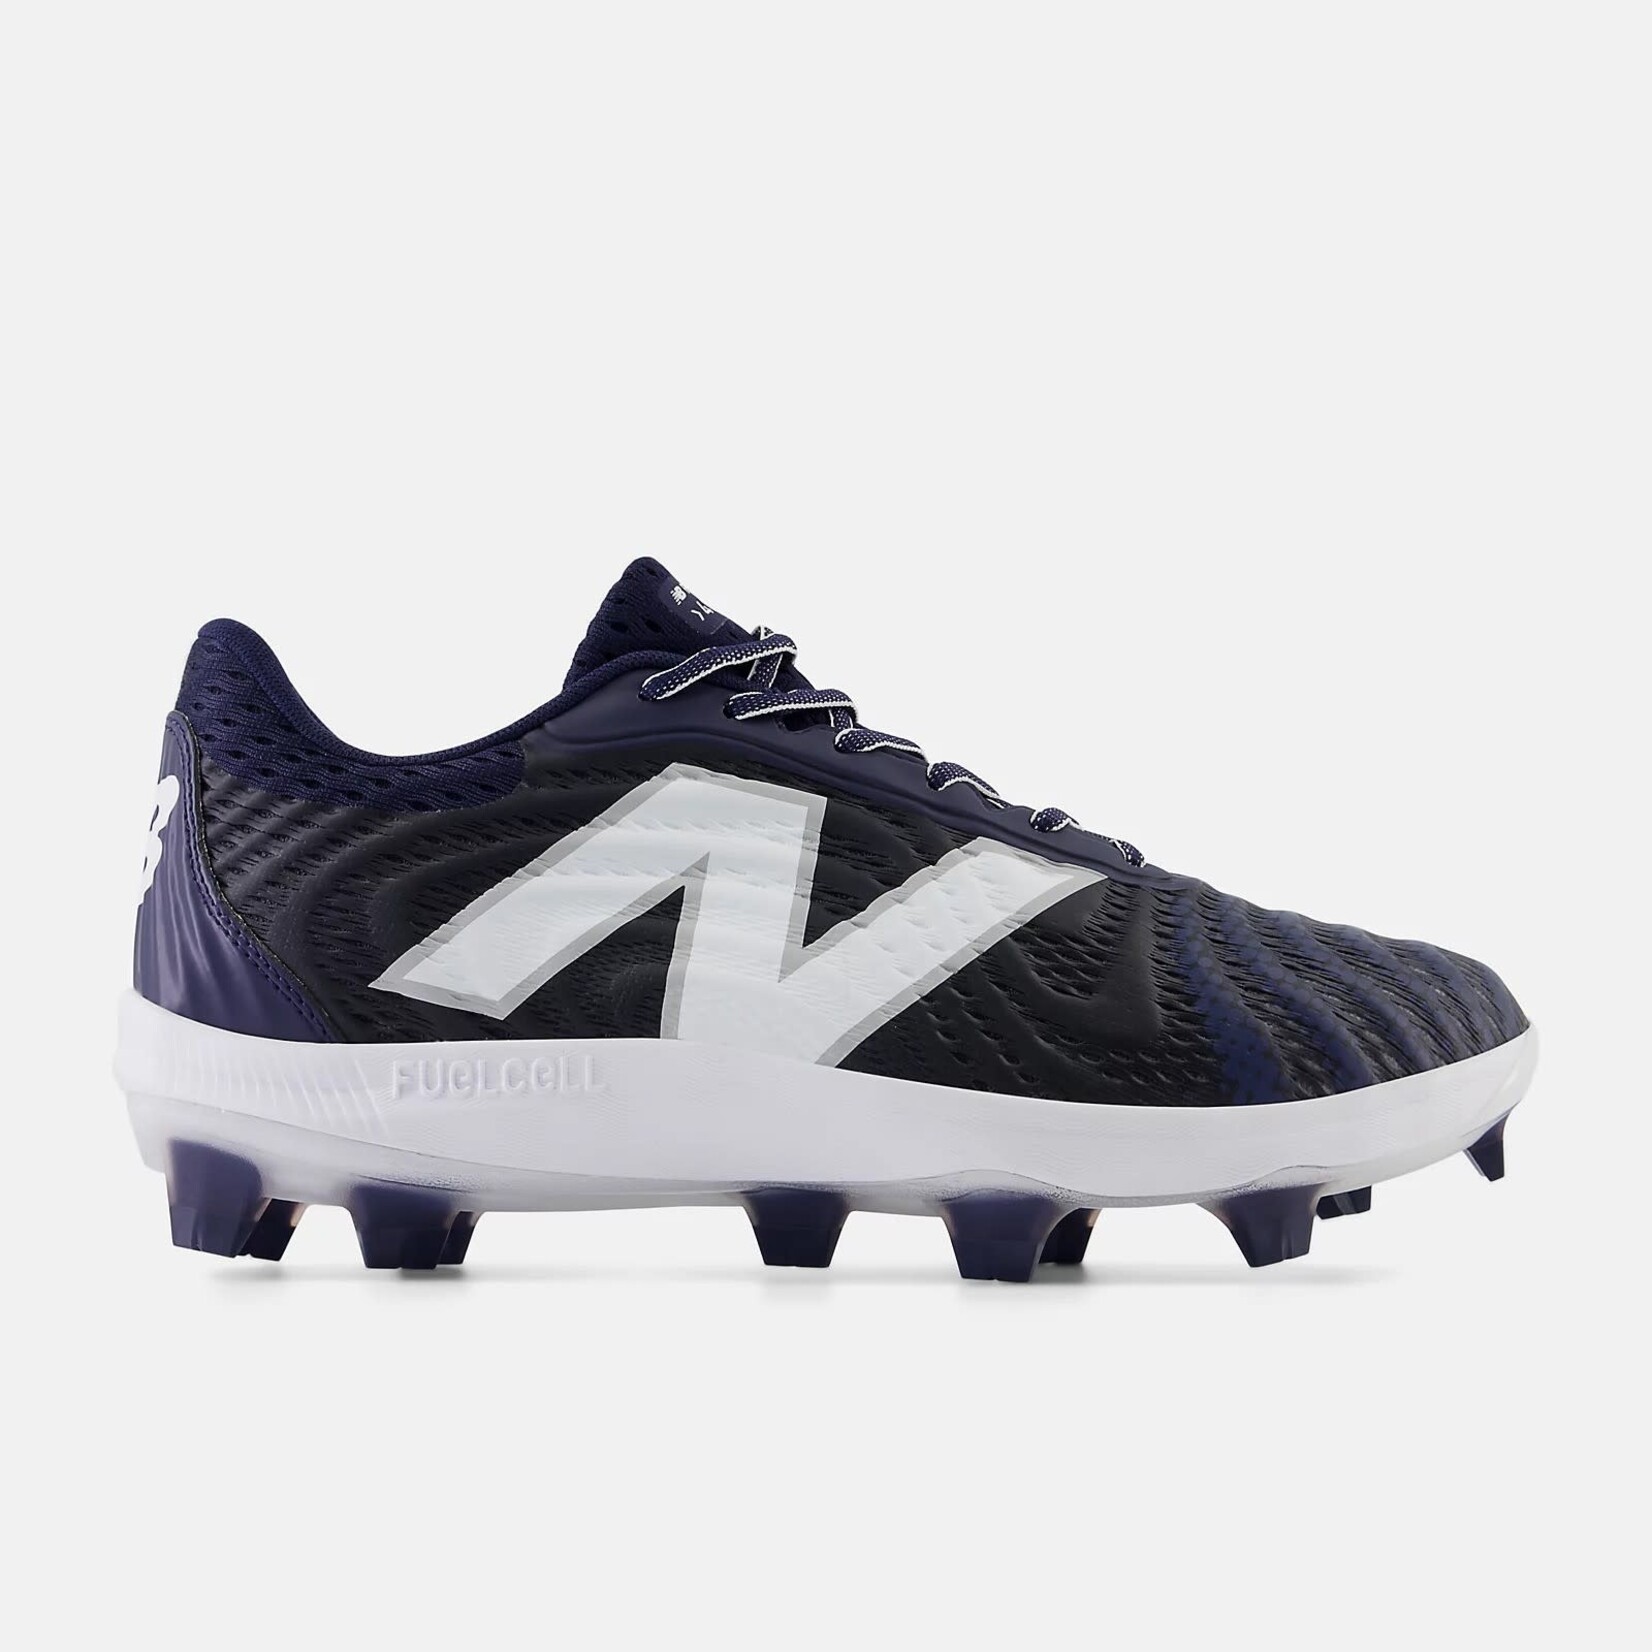 New Balance FuelCell 4040 v7 Molded